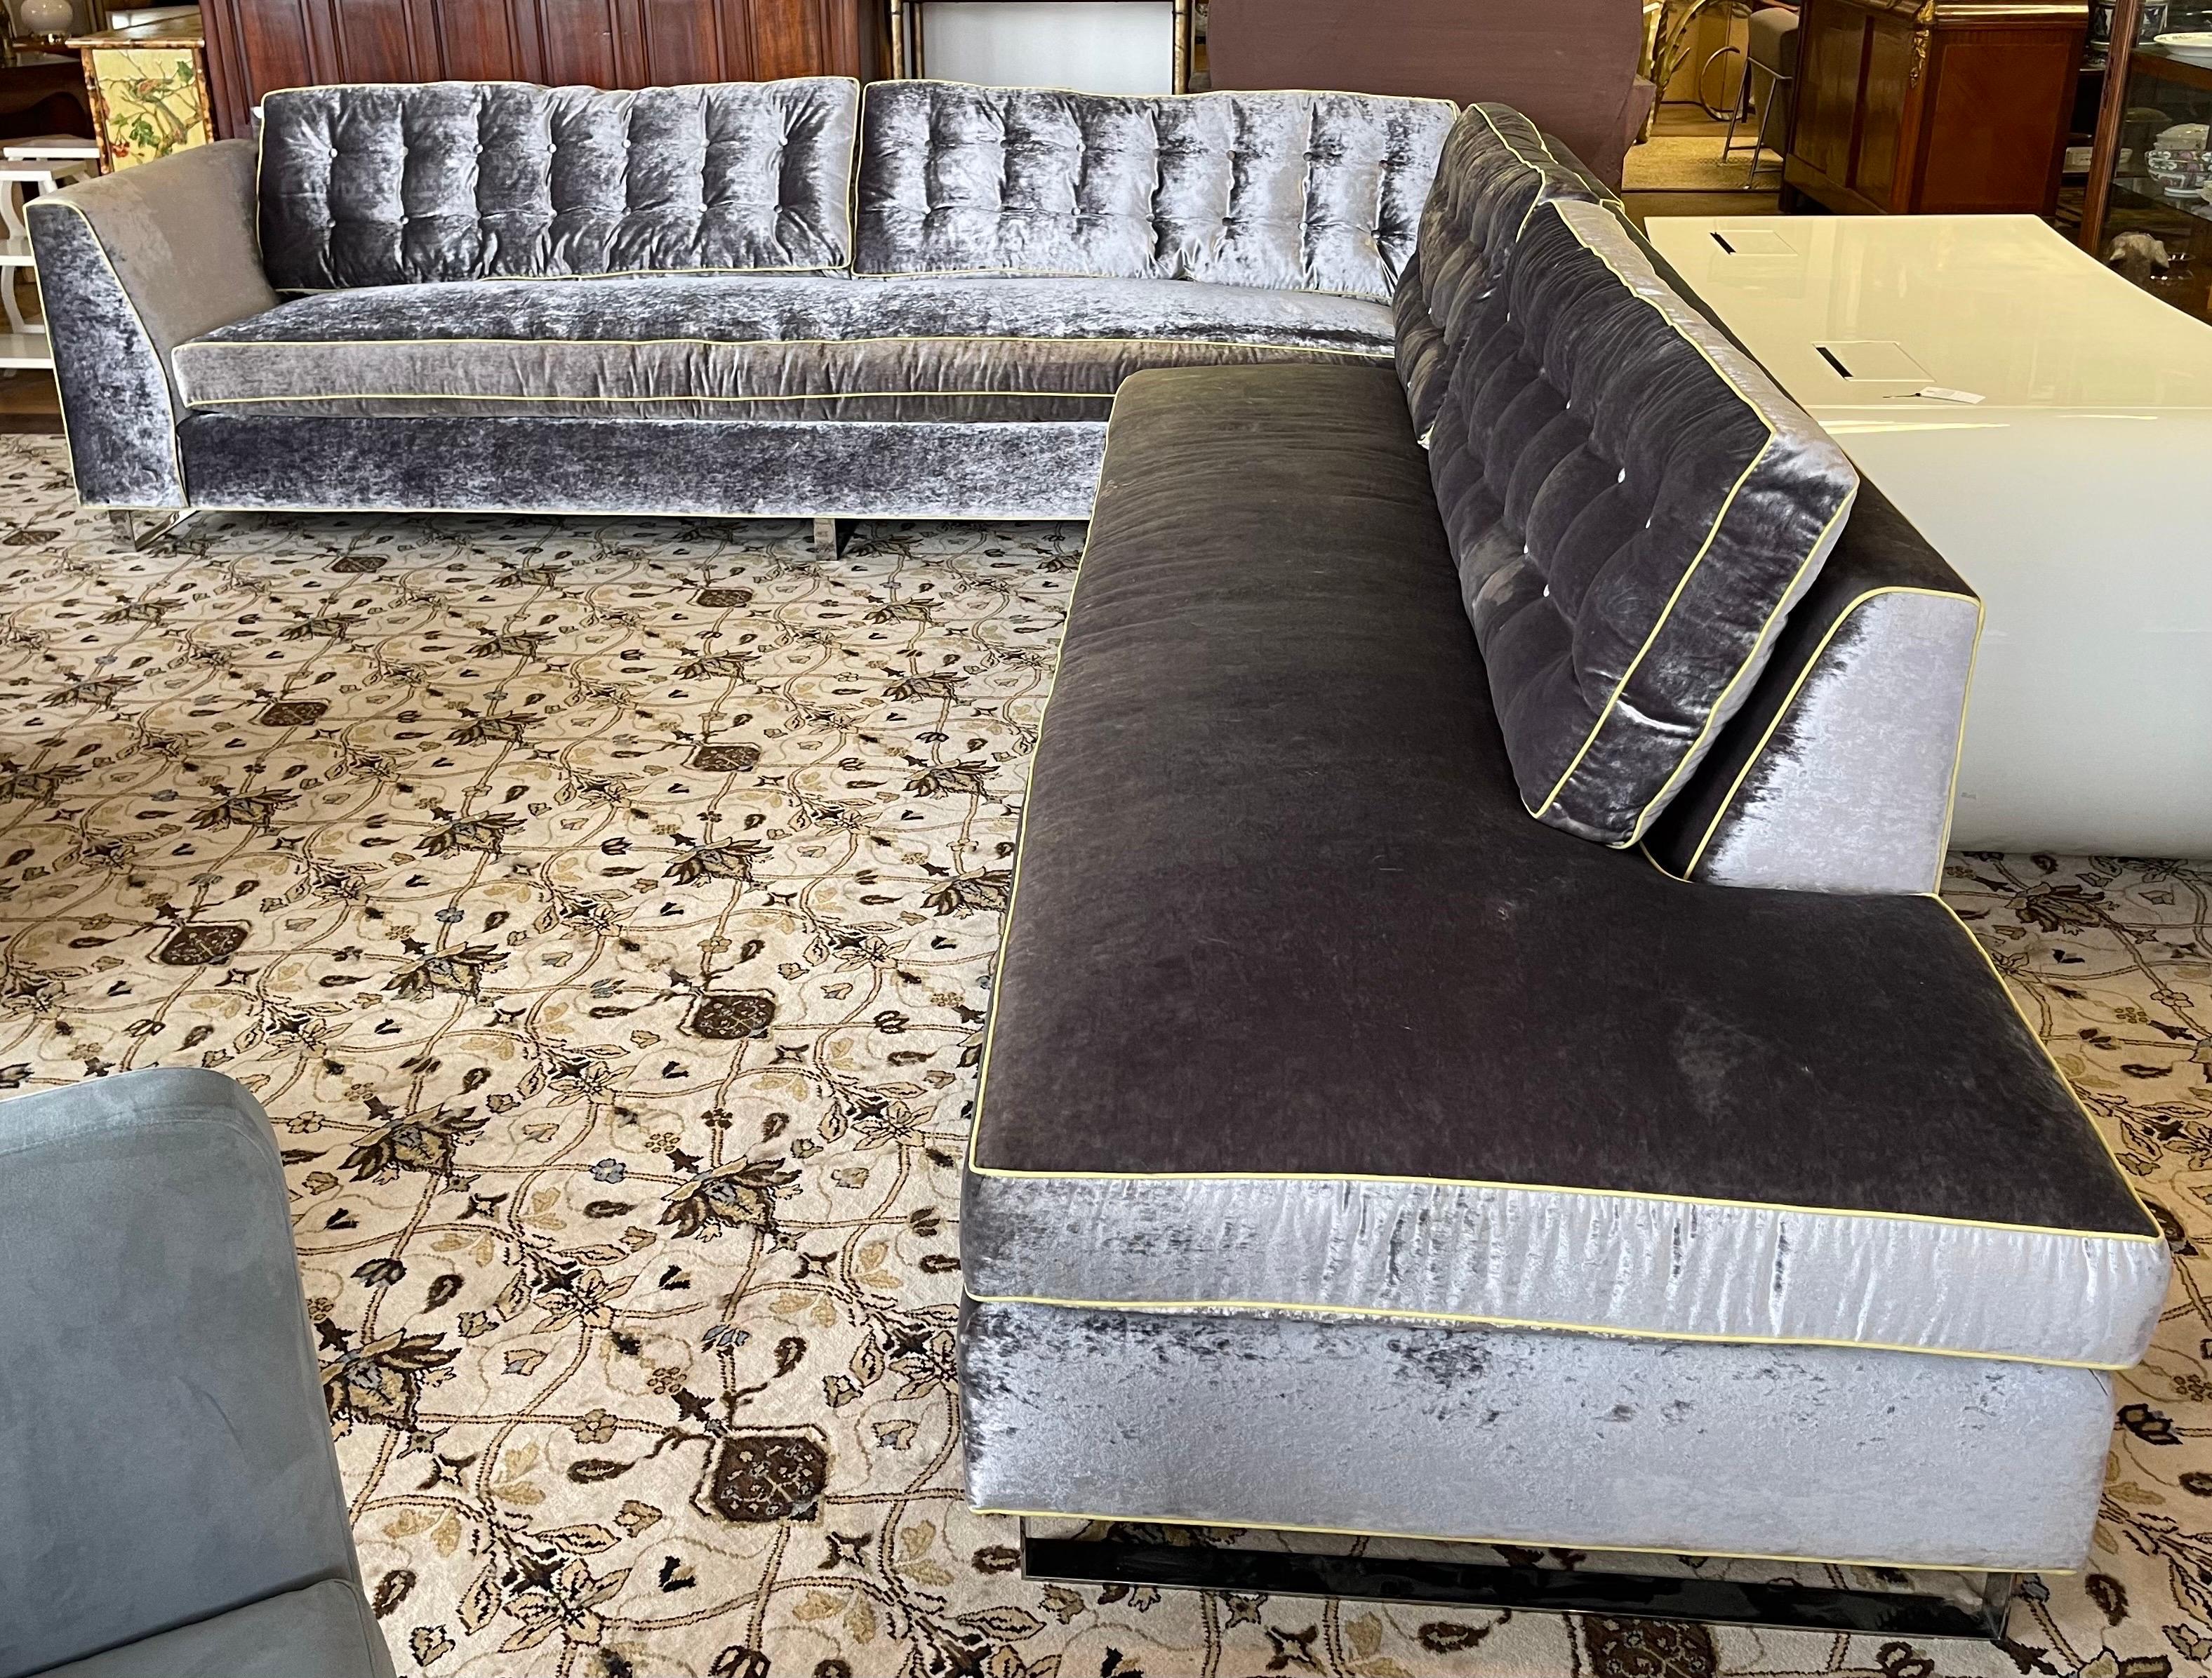 Magnificent, one of a kind bespoke two piece sectional sofa done for a client
in a luxurious Donghia gray silk and crushed velvet fabric with a chartreuse welt. The color turns an iridescent silver or grey depending on how the light hits it. The